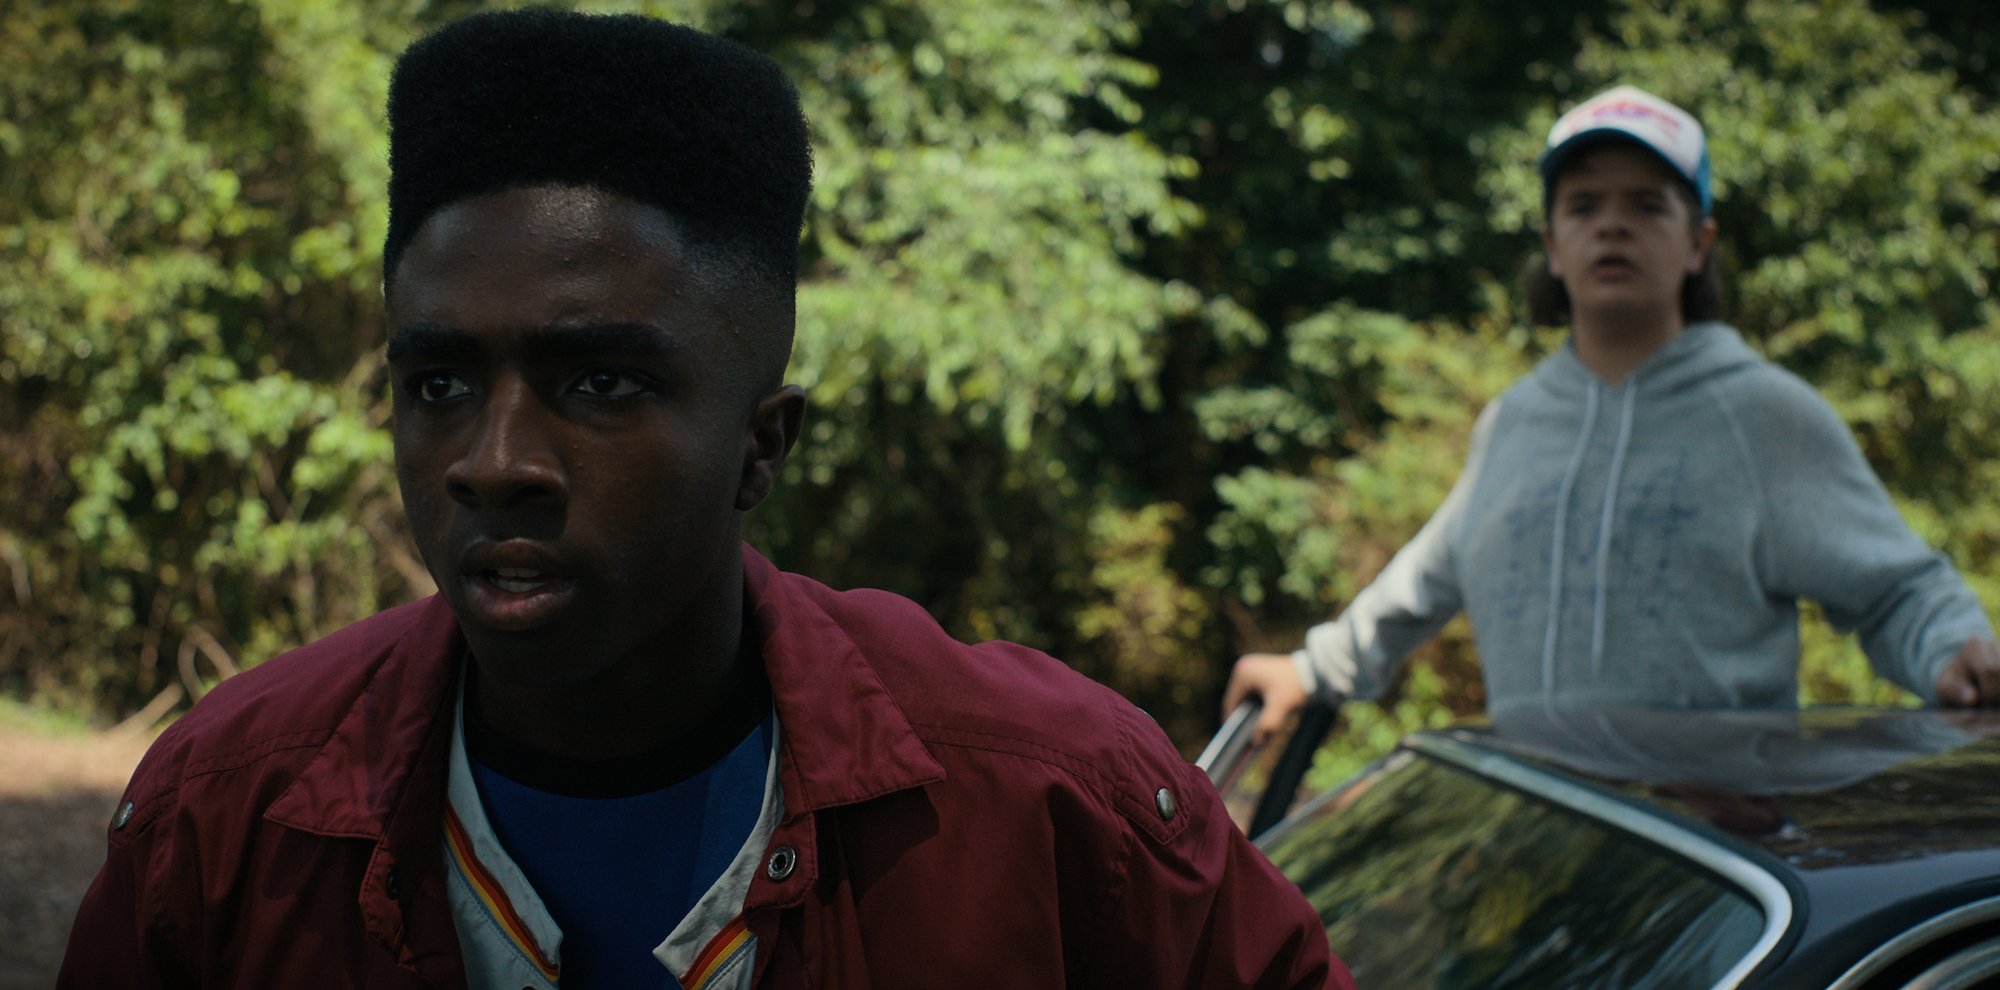 'Stranger Things 4' fan theories have star Caleb McLaughlin, seen here in a production still wearing a maroon jacket, thinking people need to relax.